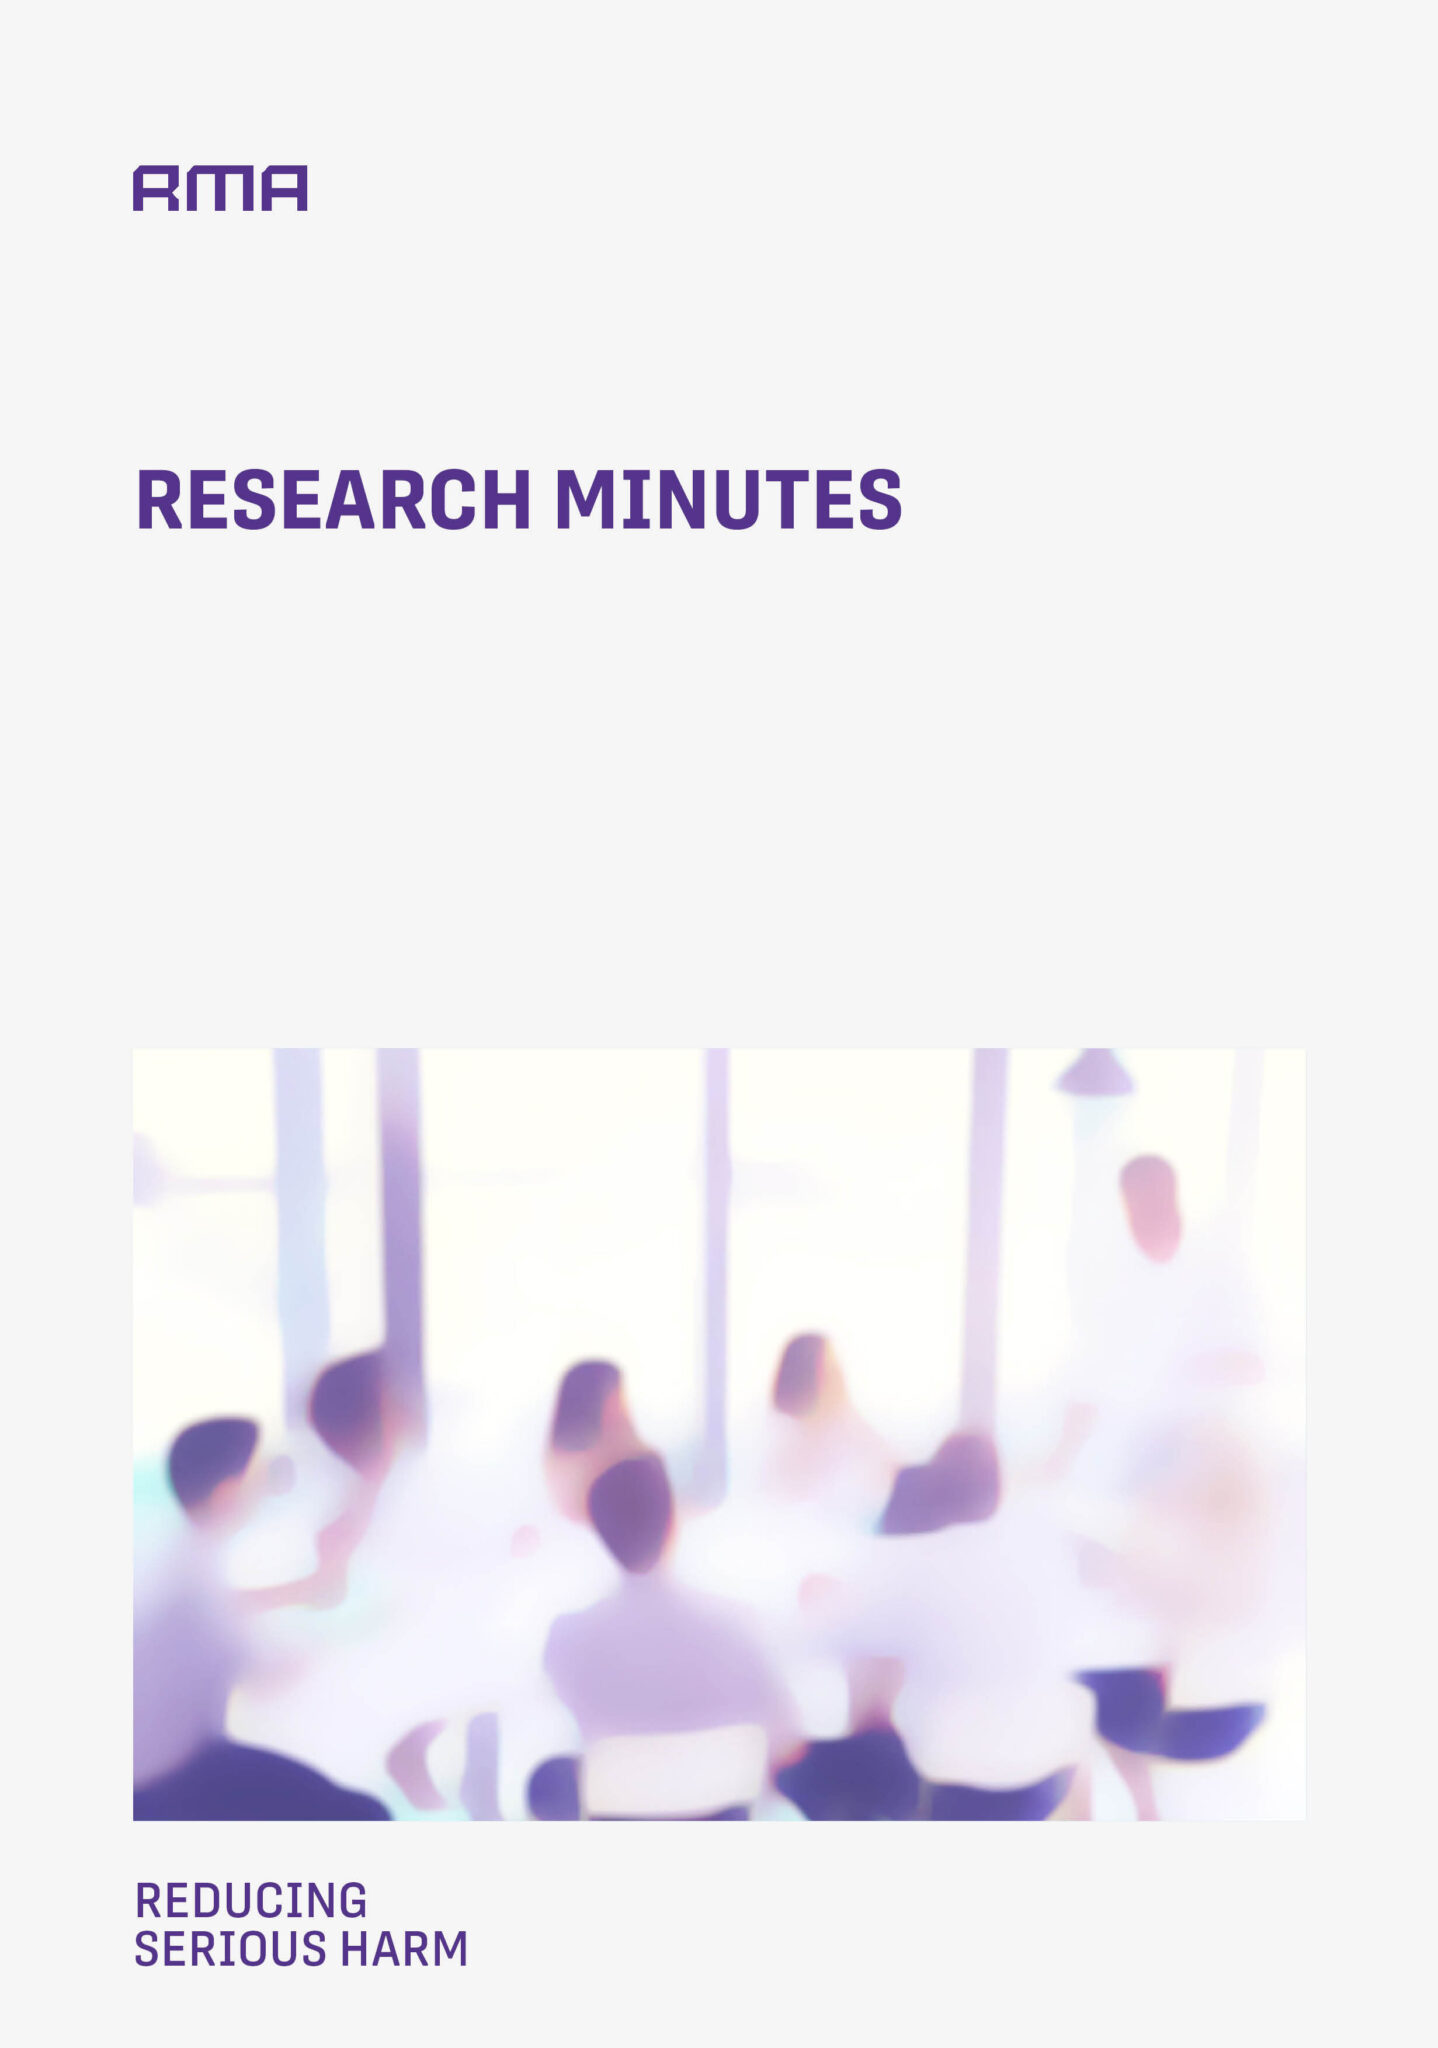 2022-23 Research Committee Minutes Cover Image